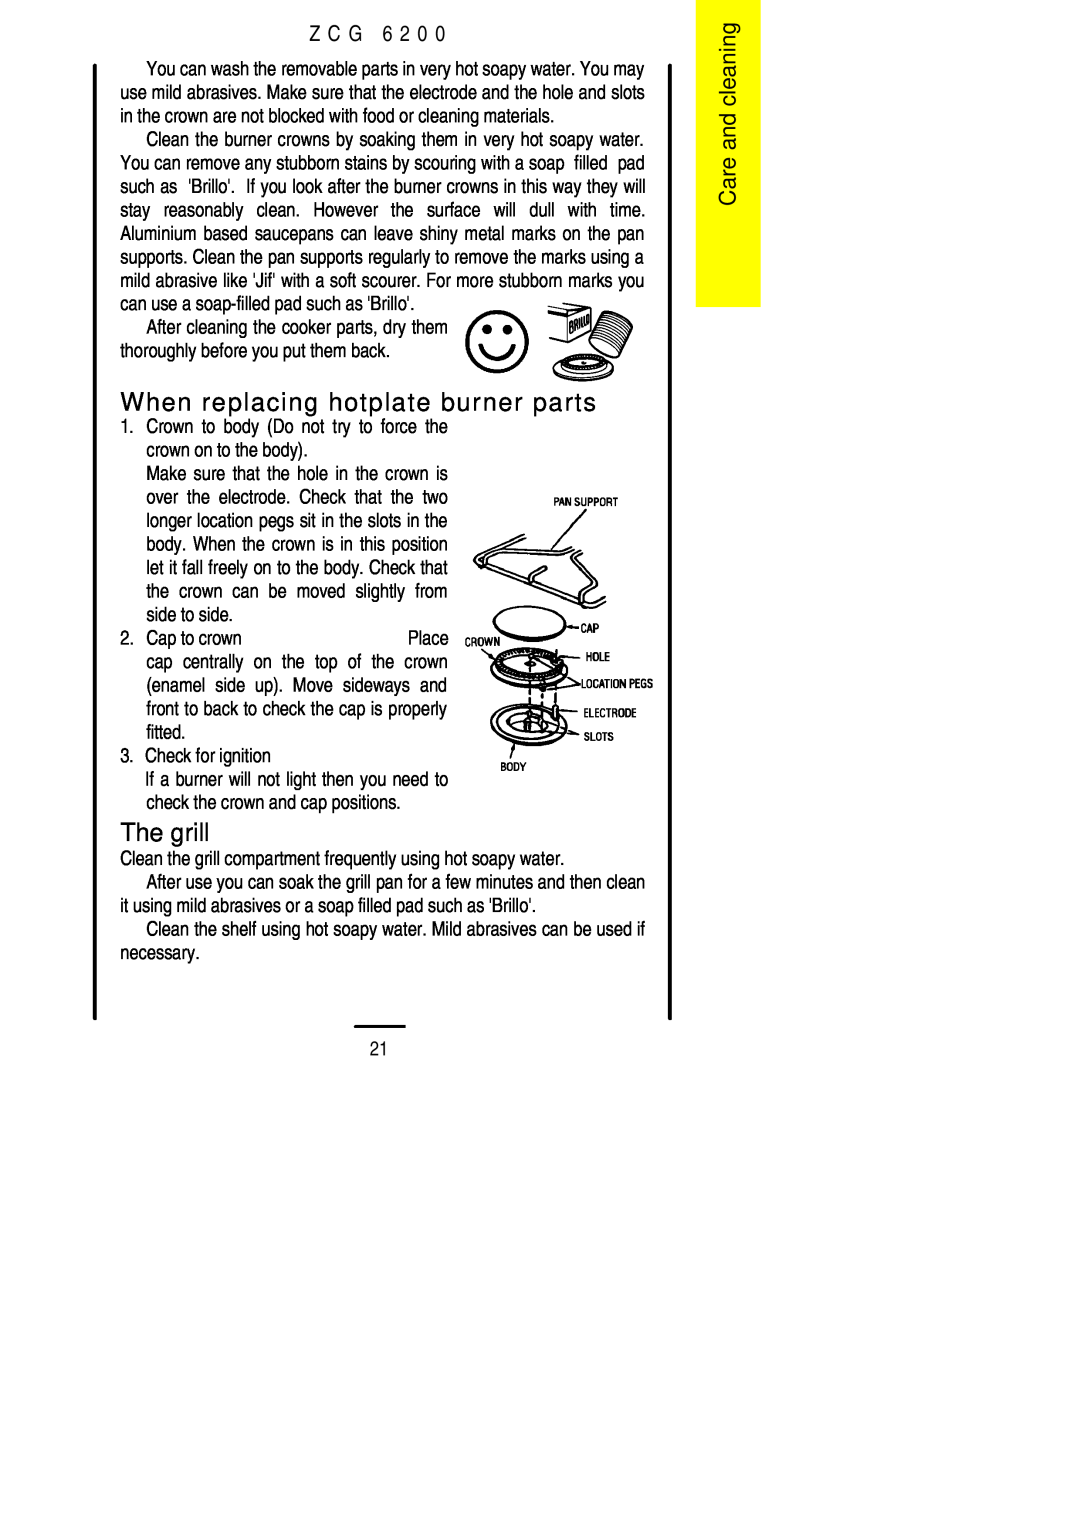 Zanussi ZCG 6200 installation instructions When replacing hotplate burner parts, The grill, Care and cleaning, Z C G 